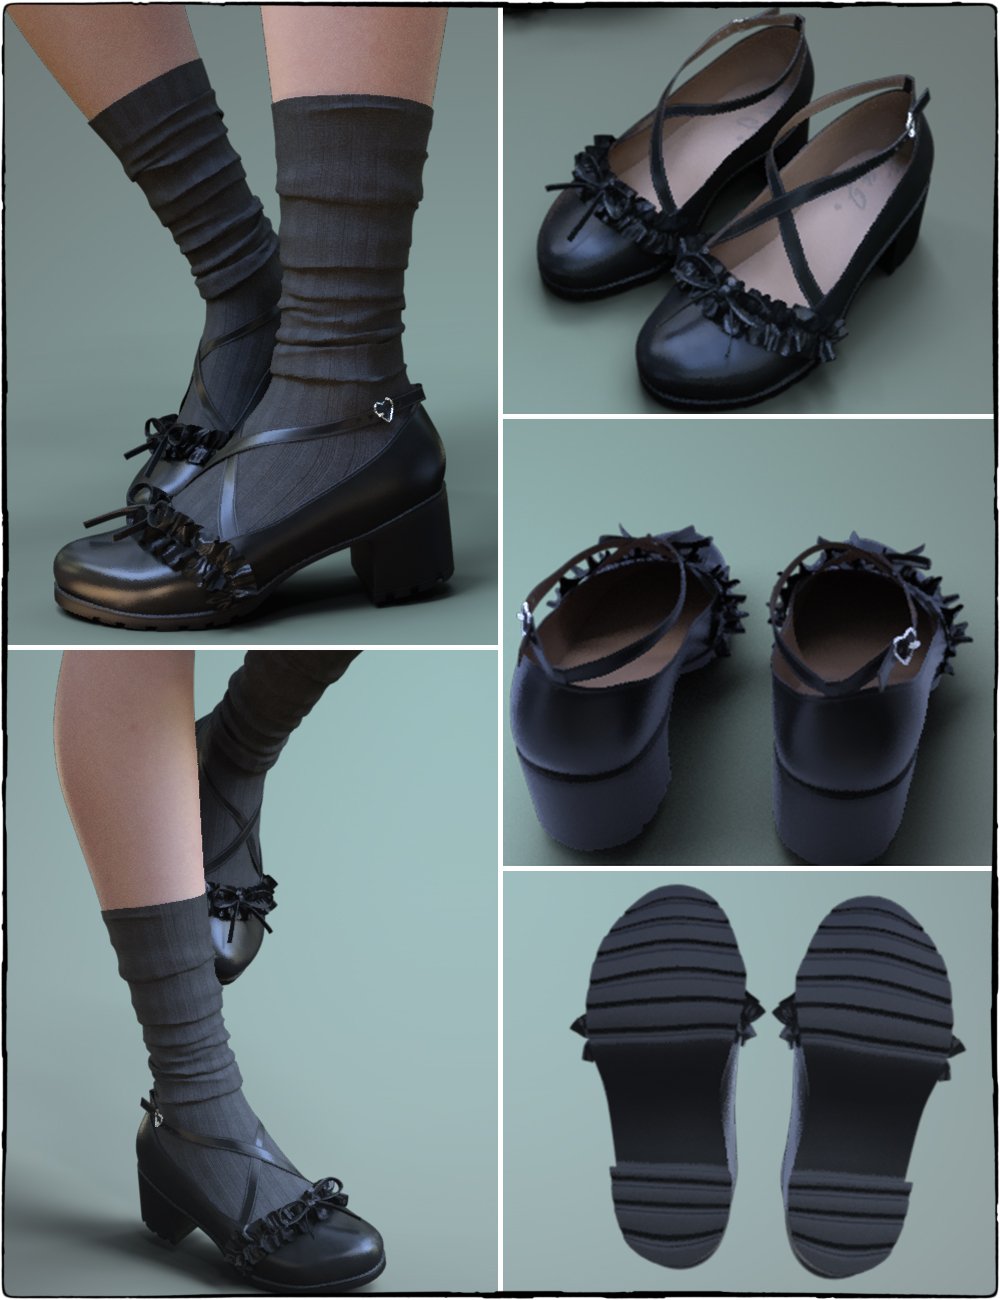 KuJ Kawaii Fashion Socks and Shoes Collection II for Genesis 8 and 8.1 Females by: Kujira, 3D Models by Daz 3D